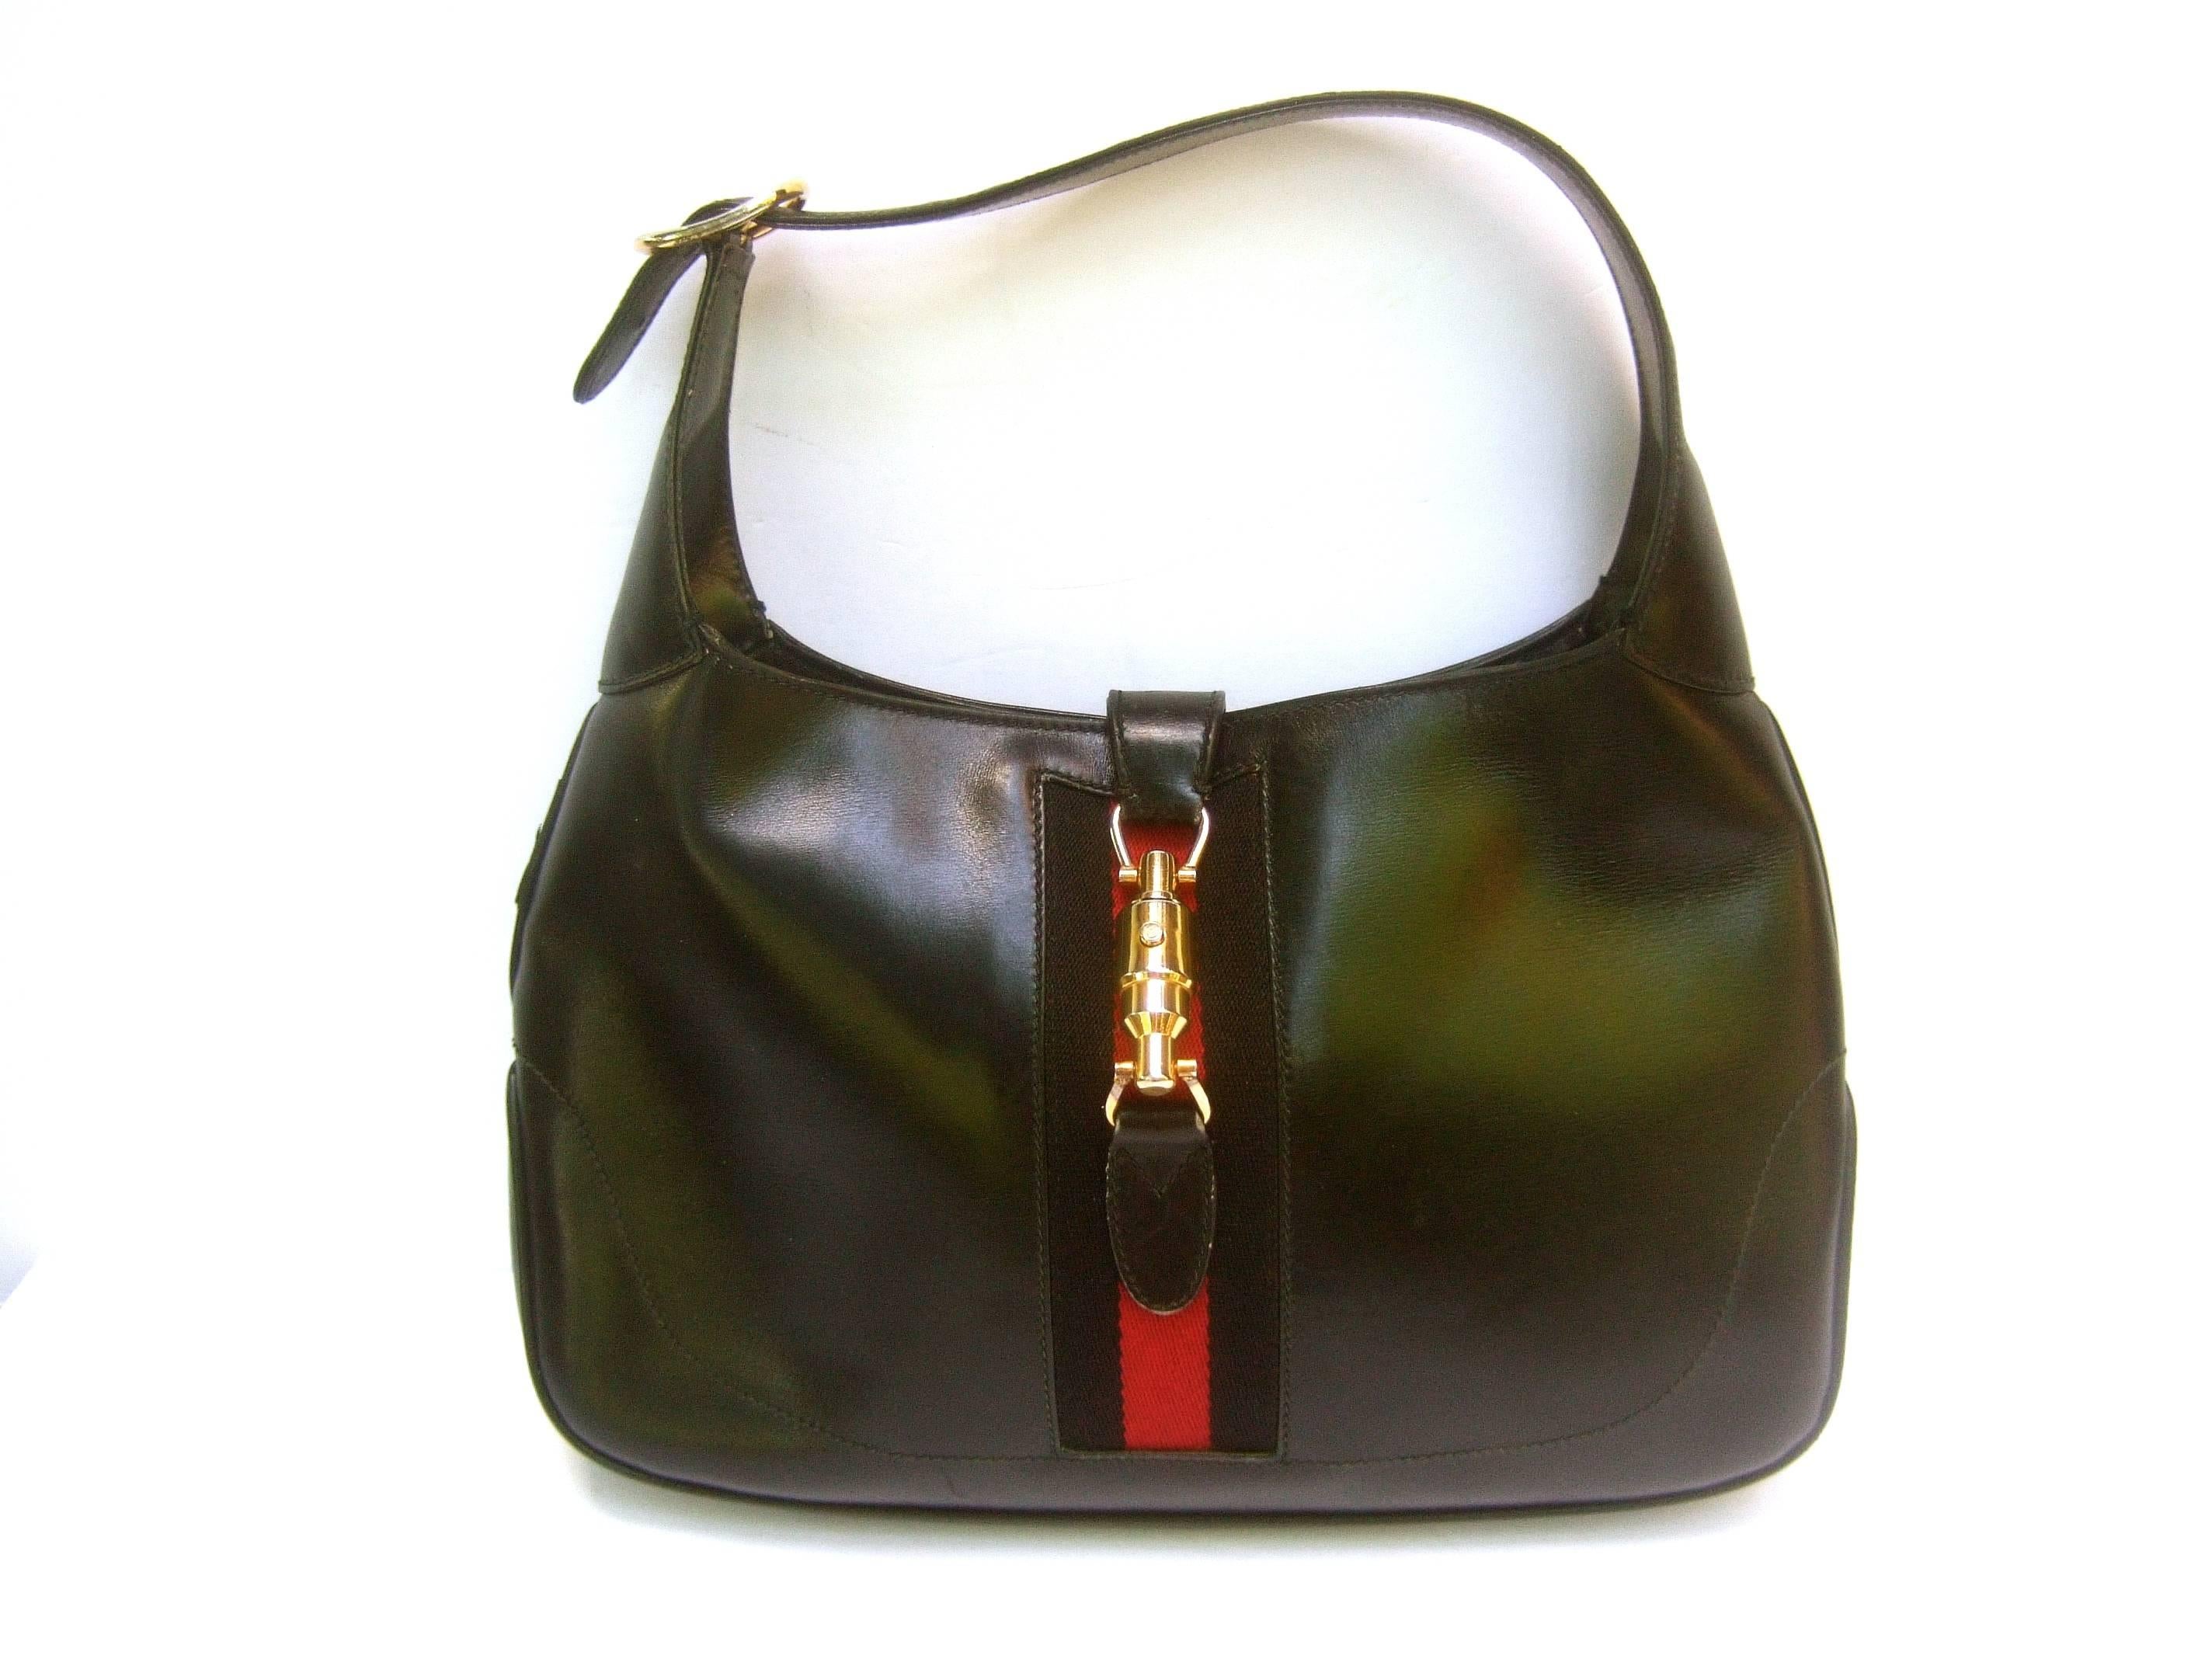 Gucci Italy Iconic black leather piston Jackie O handbag ca 1970s
The classic Gucci handbag is designed with ebony leather 
Accented with Gucci's signature red and black canvas 
webbed stripes

The sleek gilt metal cylinder clasp mechanism is